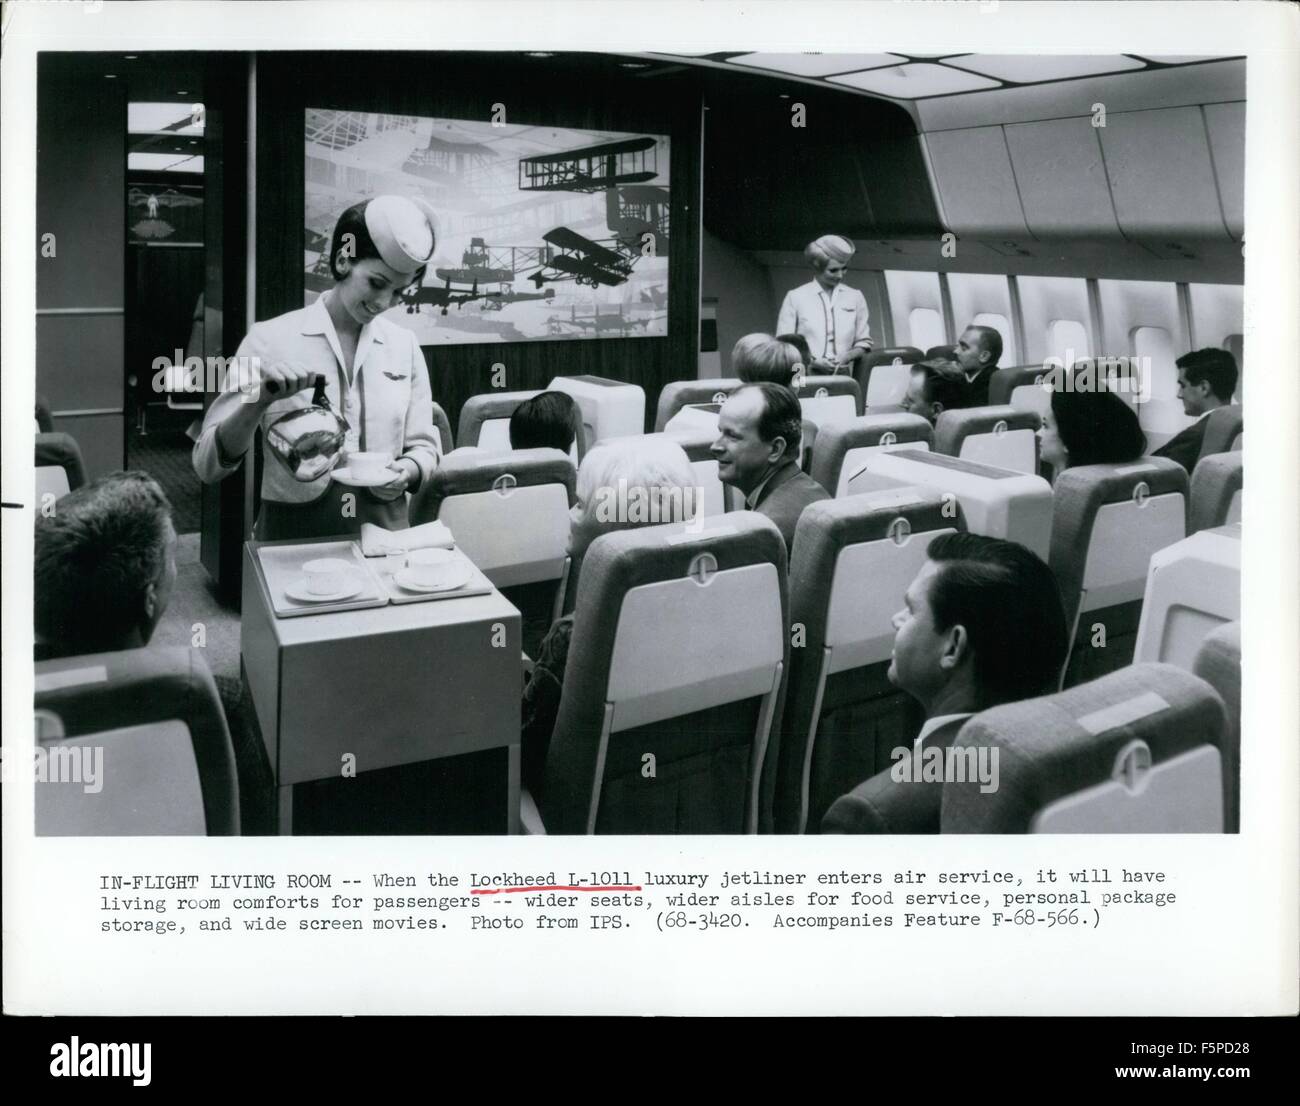 1968 - In-Flight Living Room:- When the Lockheed L-1011 luxury Jetliner enters air service, it will have living room comforts for passengers wider seats, wider aisles for food service, personal package storage, and wide screen movies. Credit: IPS © Keystone Pictures USA/ZUMAPRESS.com/Alamy Live News Stock Photo